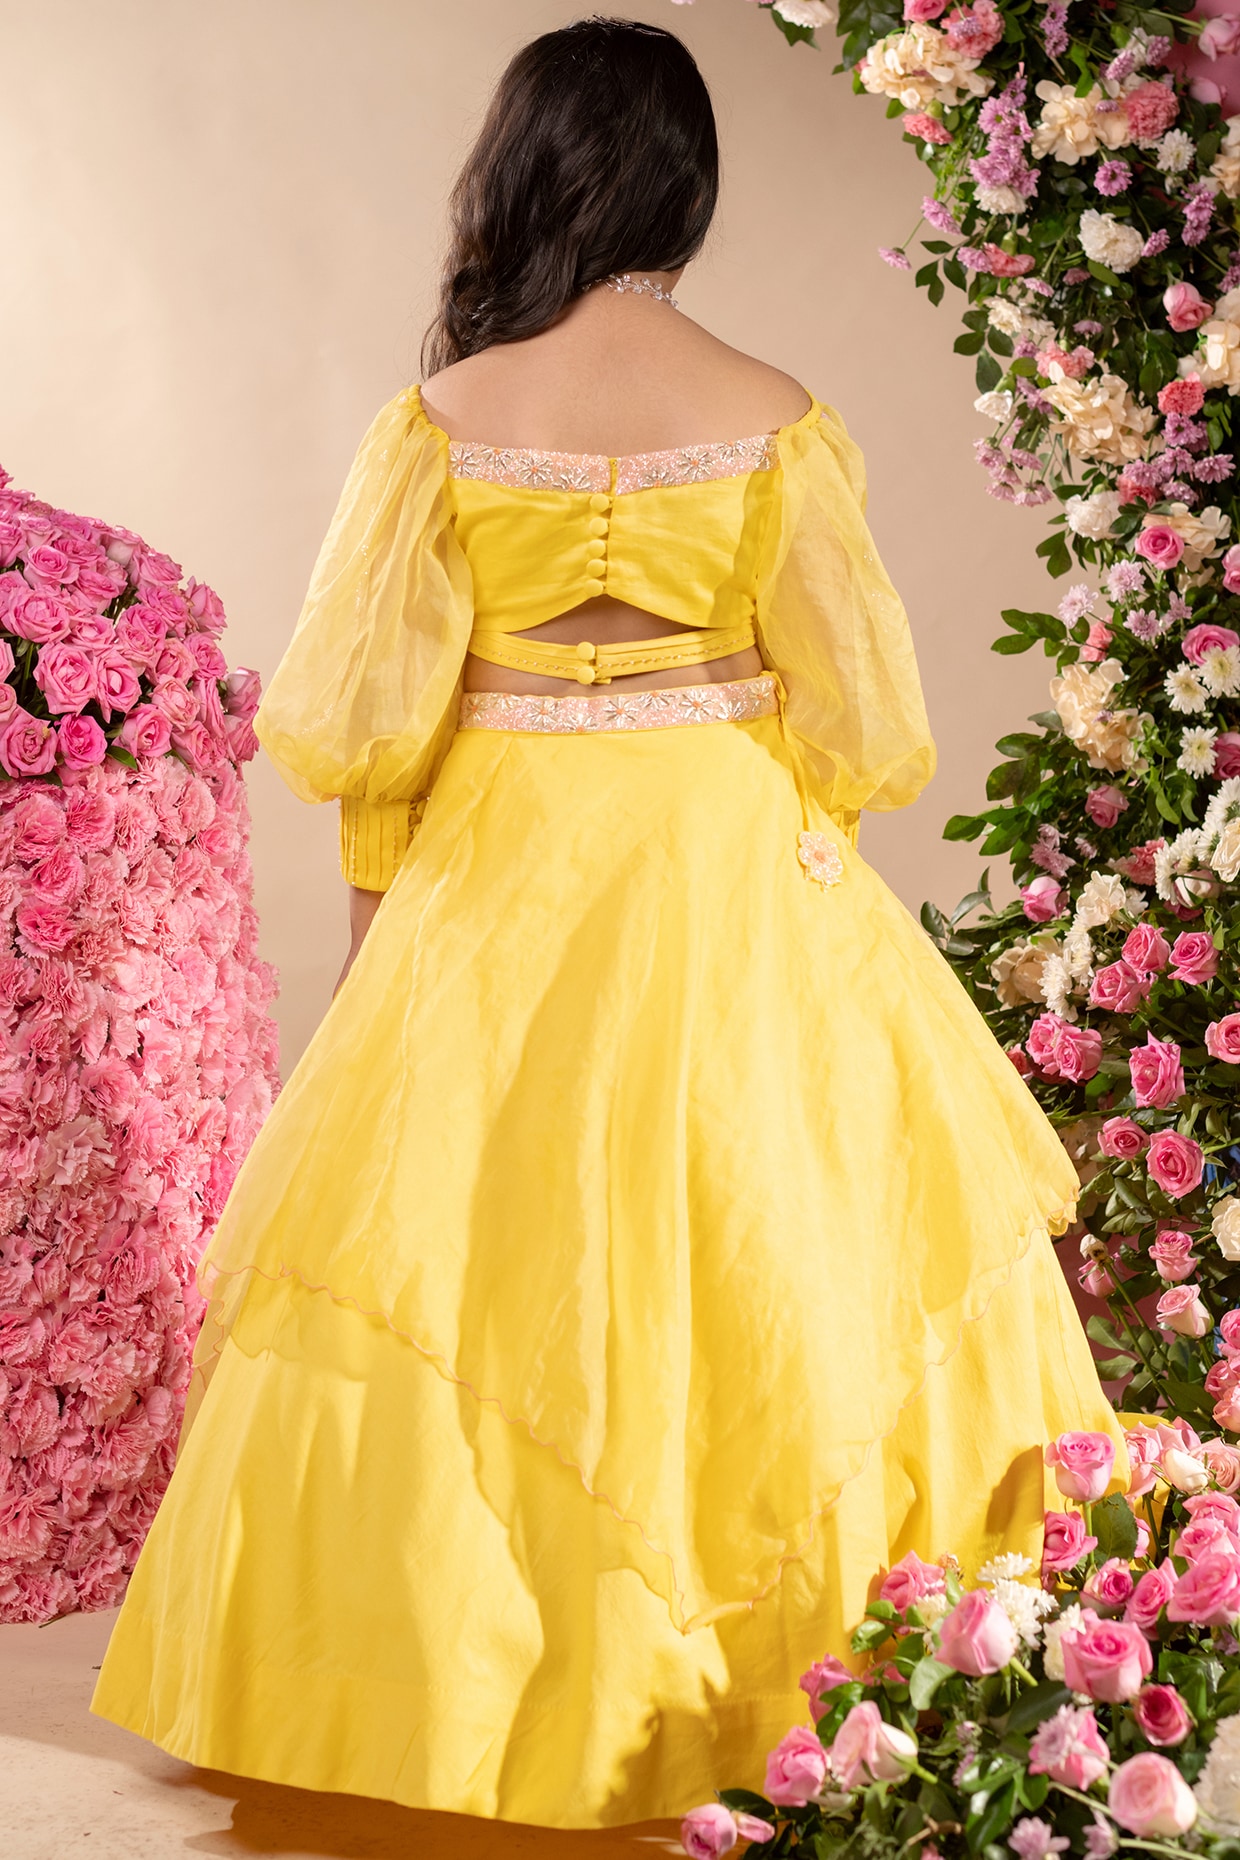 BCBGMAXAZRIA Canary yellow lace 34 sleeve flared ball gown US 6 India | Ubuy